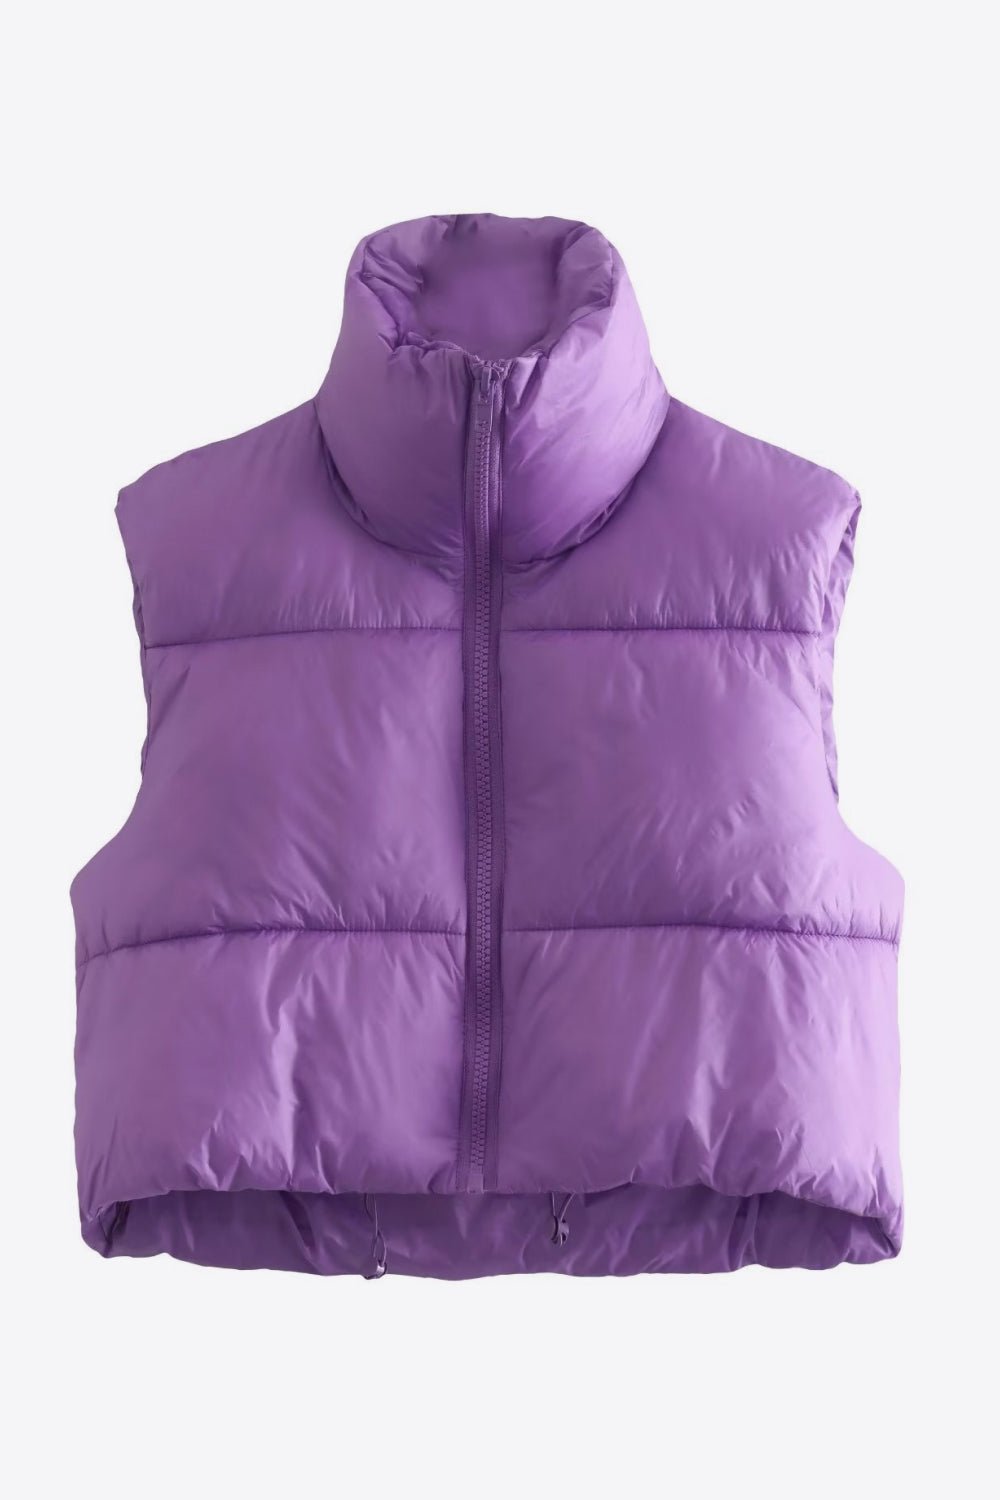 My Fave Puffer Vest